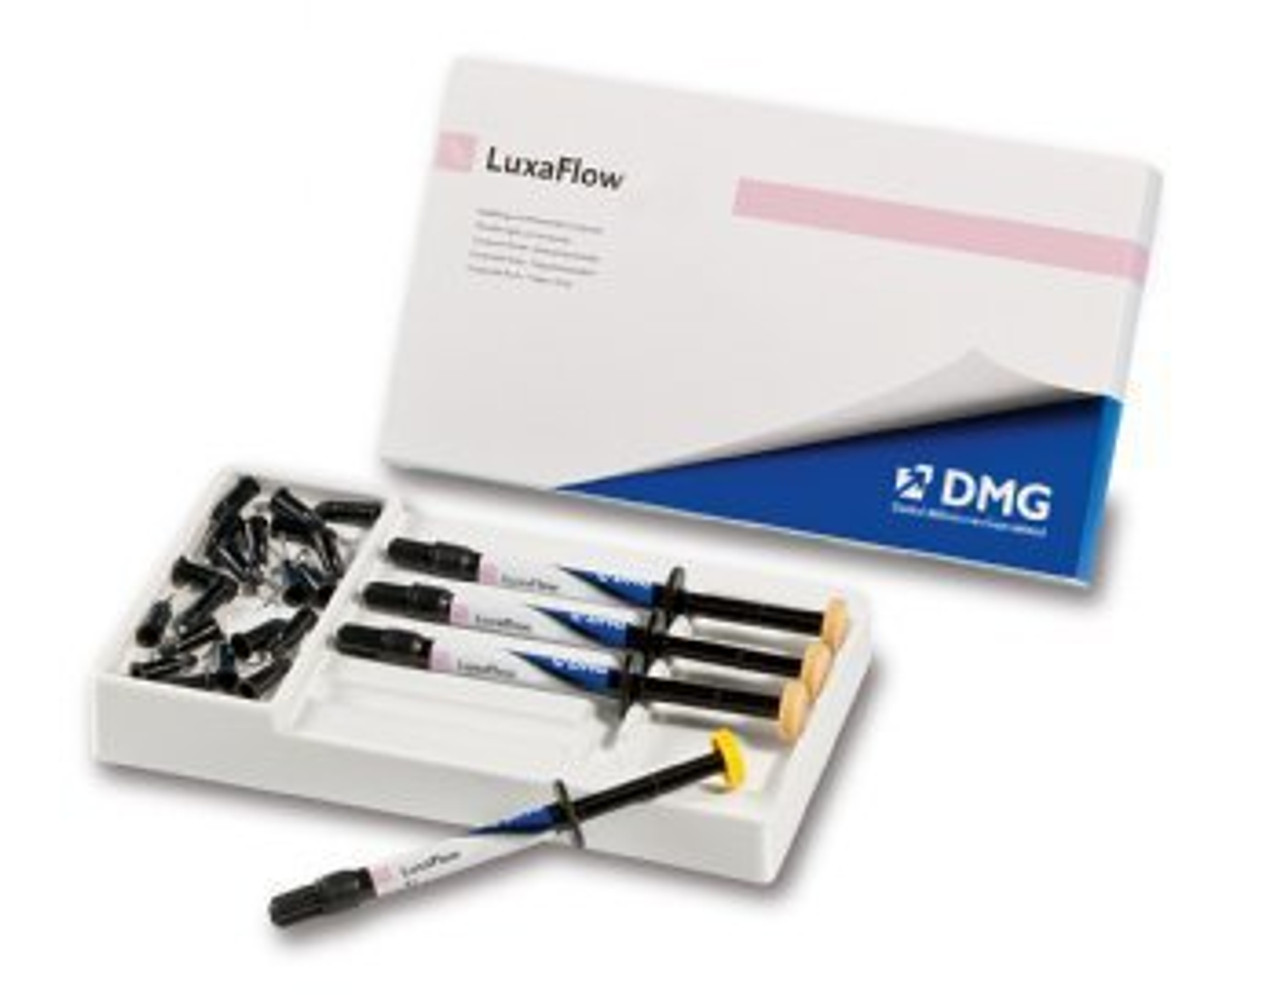 LuxaFlow Introductory Kit